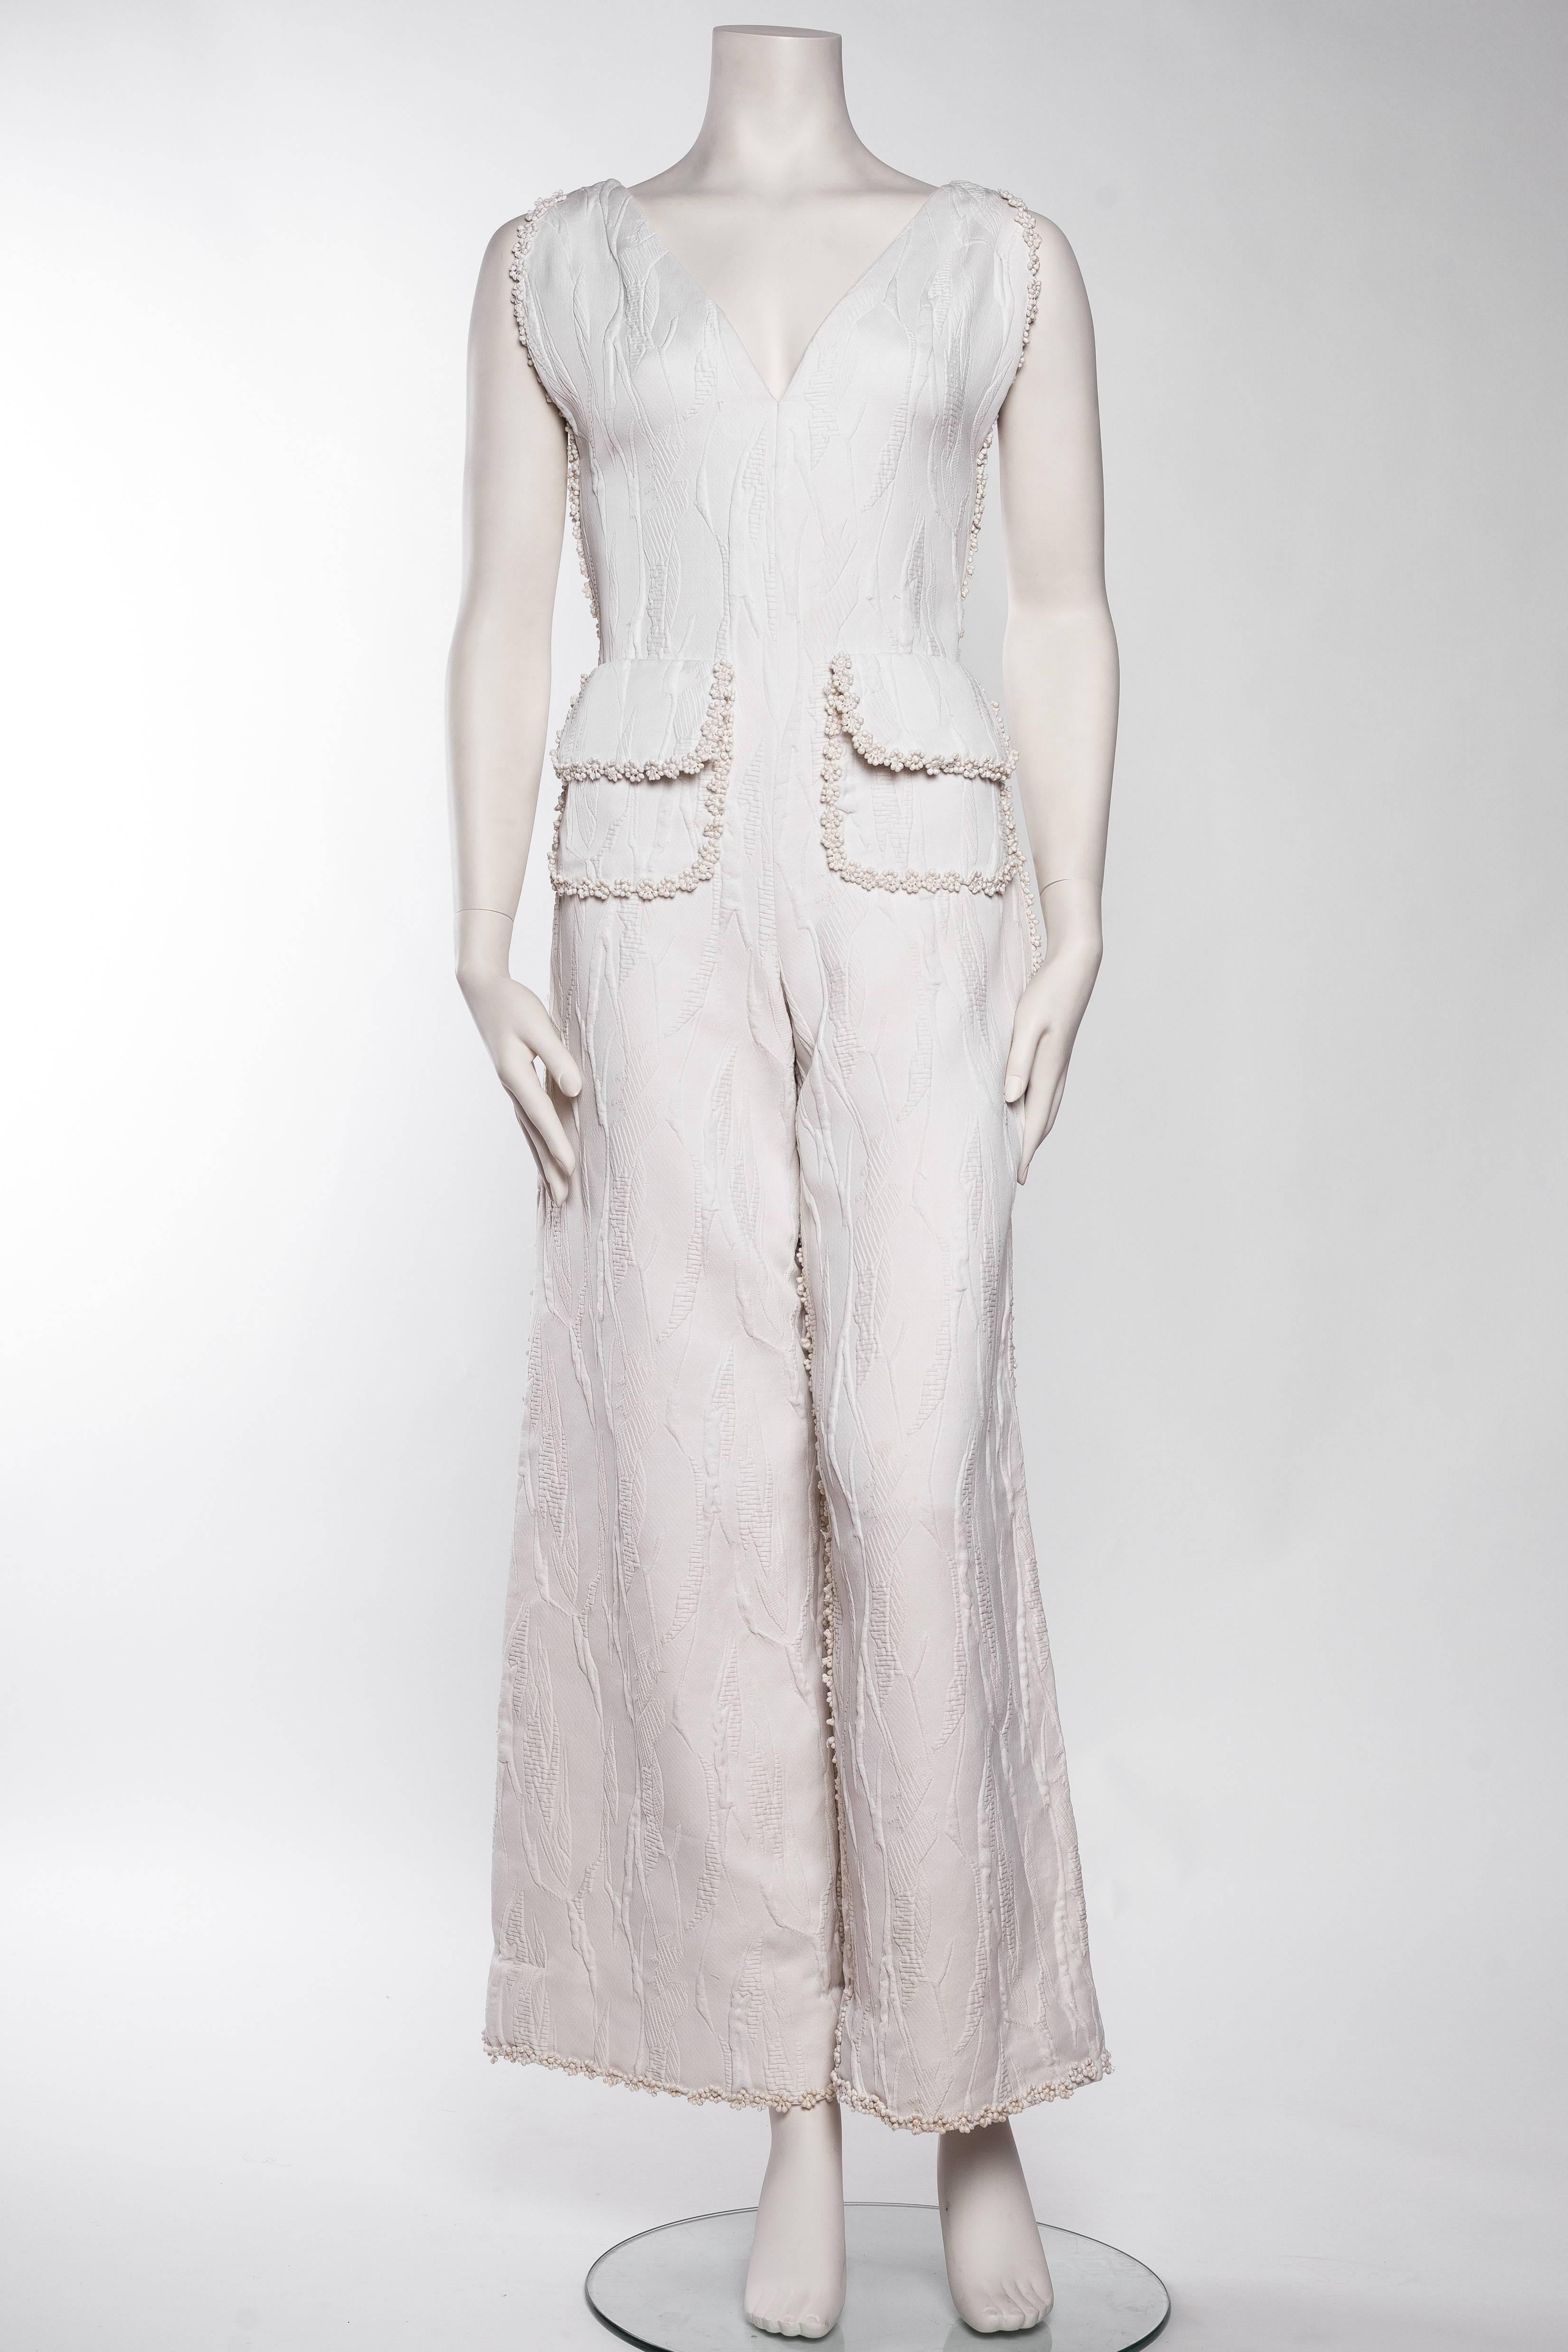 Galanos 1960 mod jumpsuit with jacquard fabric and daisy lace trim. 
